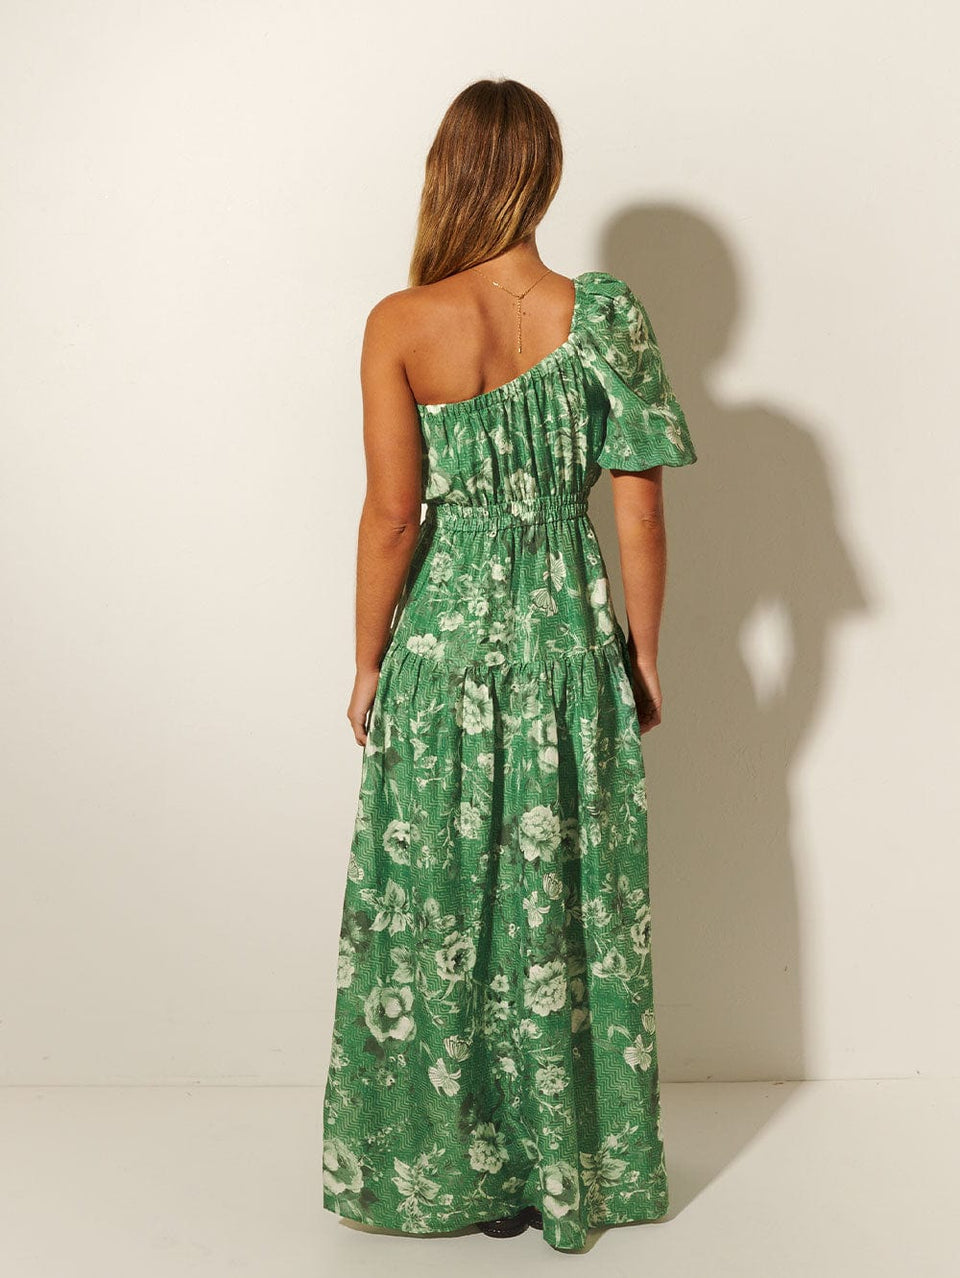 Studio model wears KIVARI Khalo Maxi Dress: A green floral one-shoulder dress with a short sleeve, elasticated front and waist, and tiered skirt.